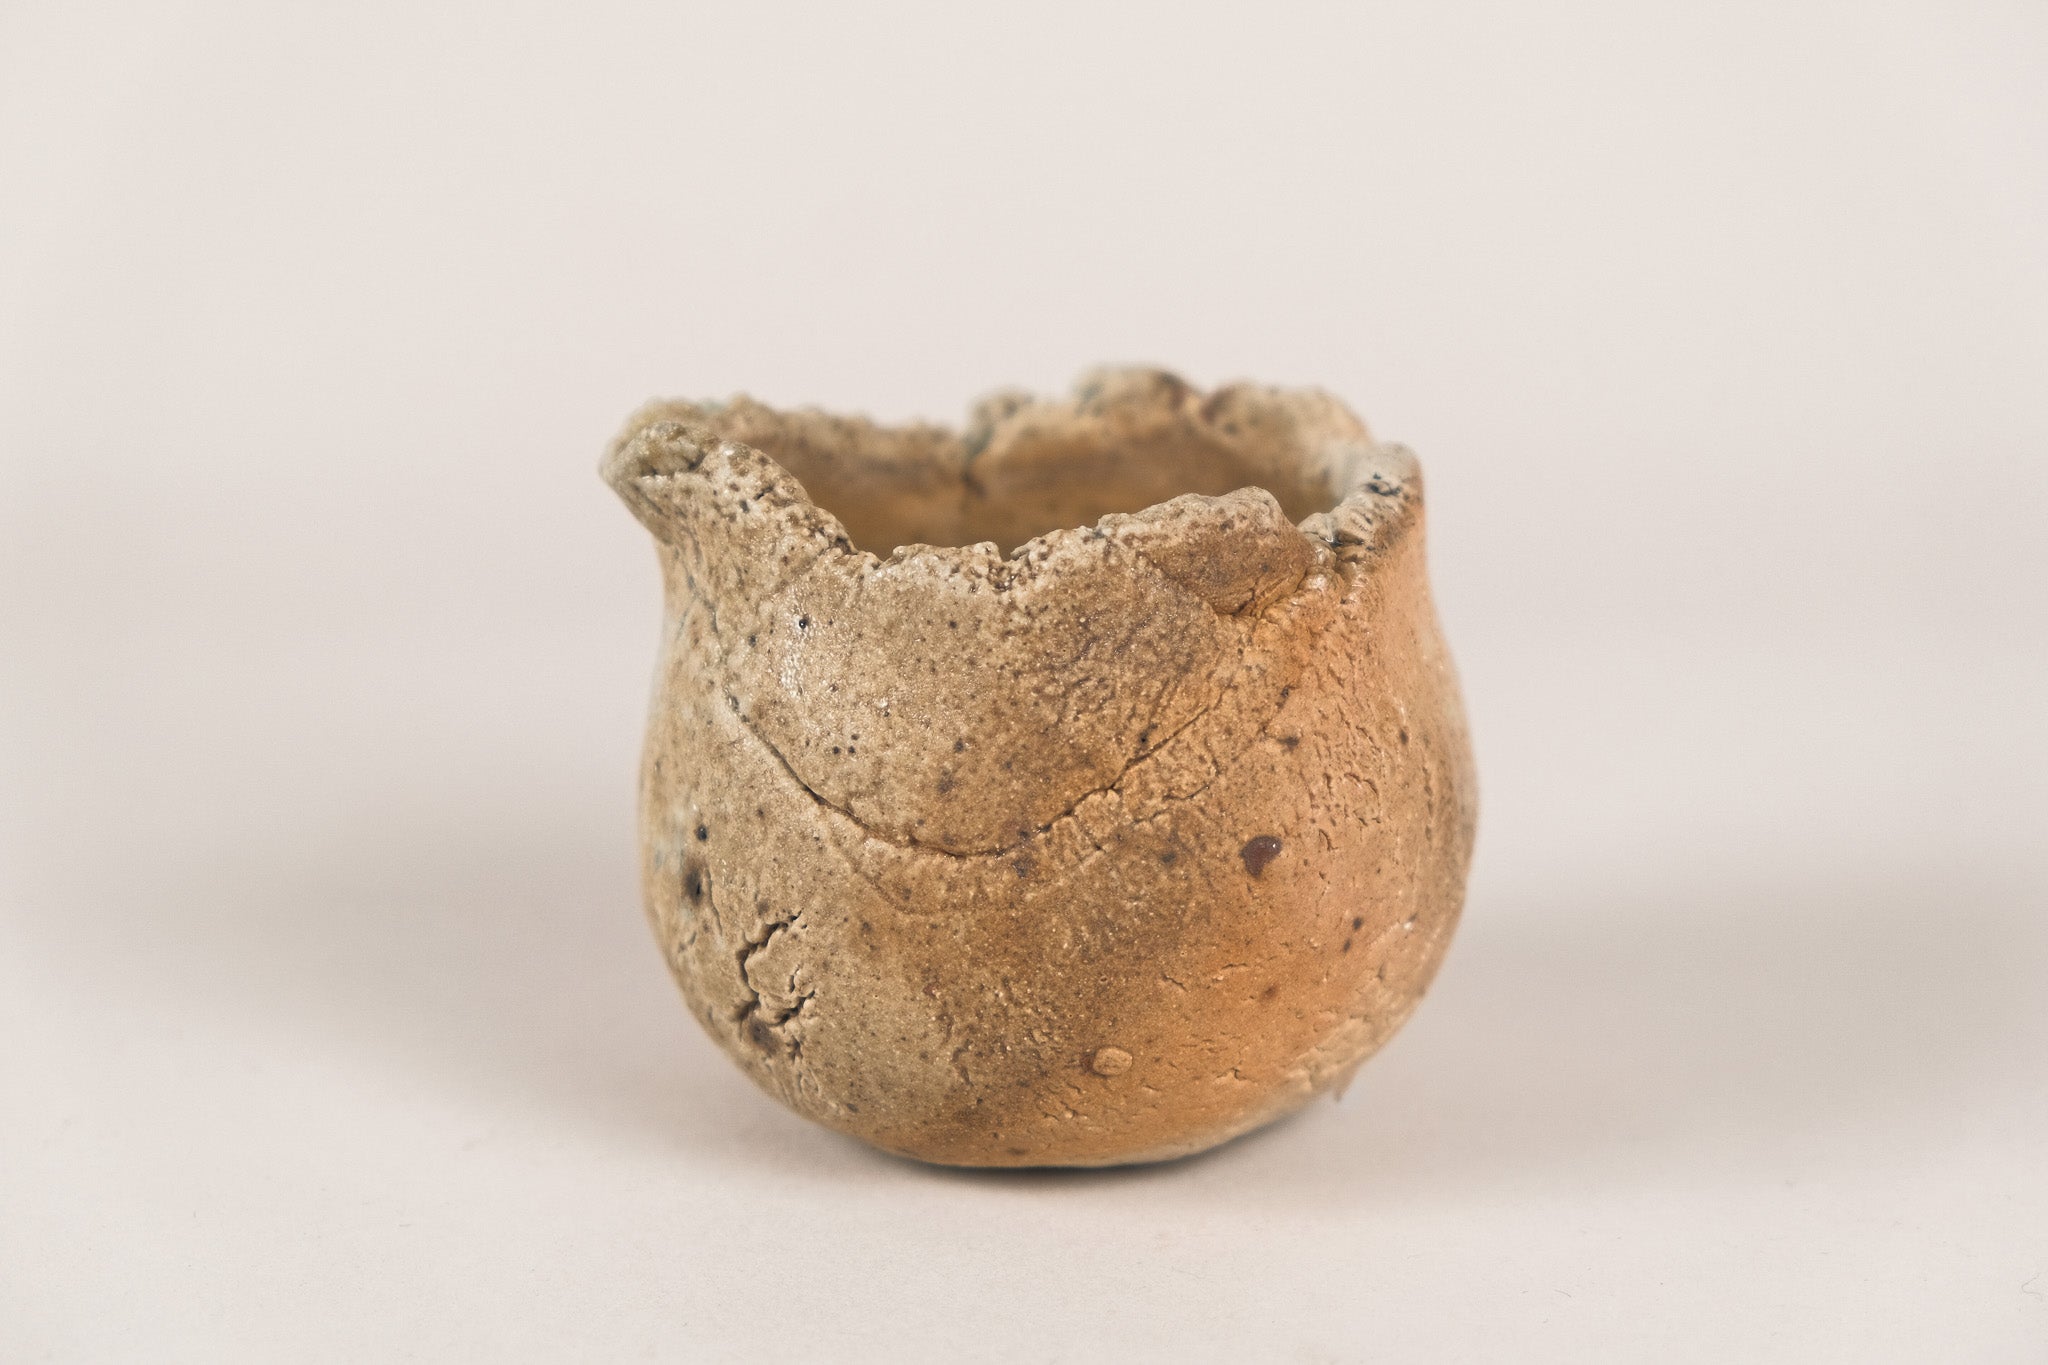 Fair Cup-Unglazed Wood-fired Fair Cup in Mottled Patterns